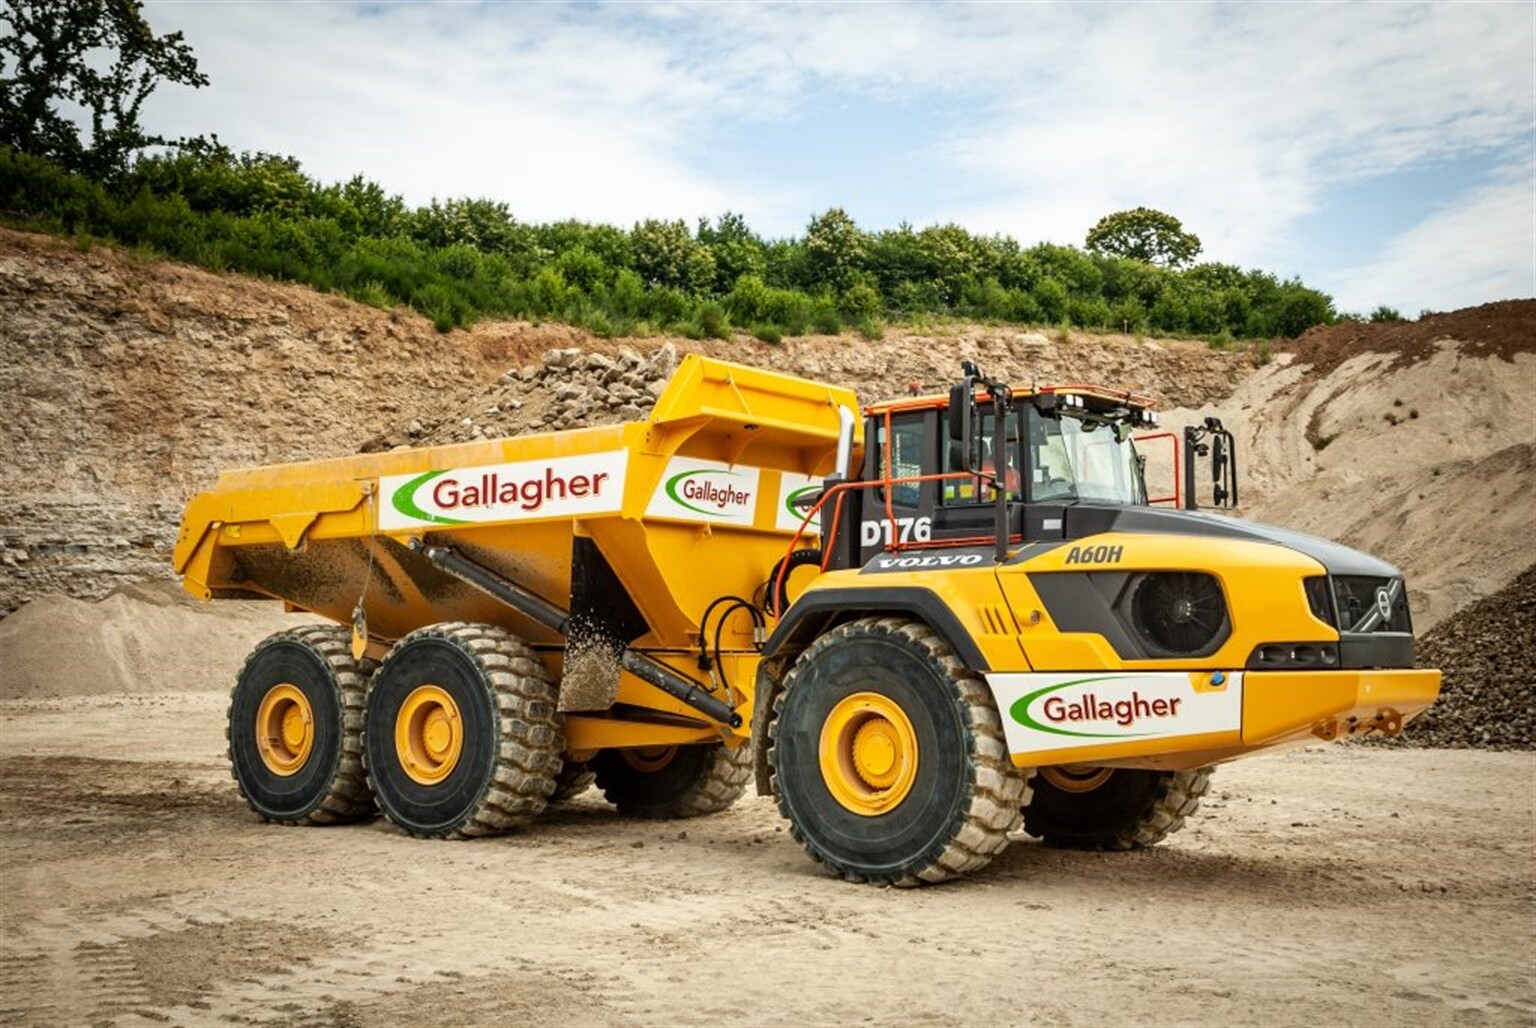 55 - Tonne ADTS for Gallagher